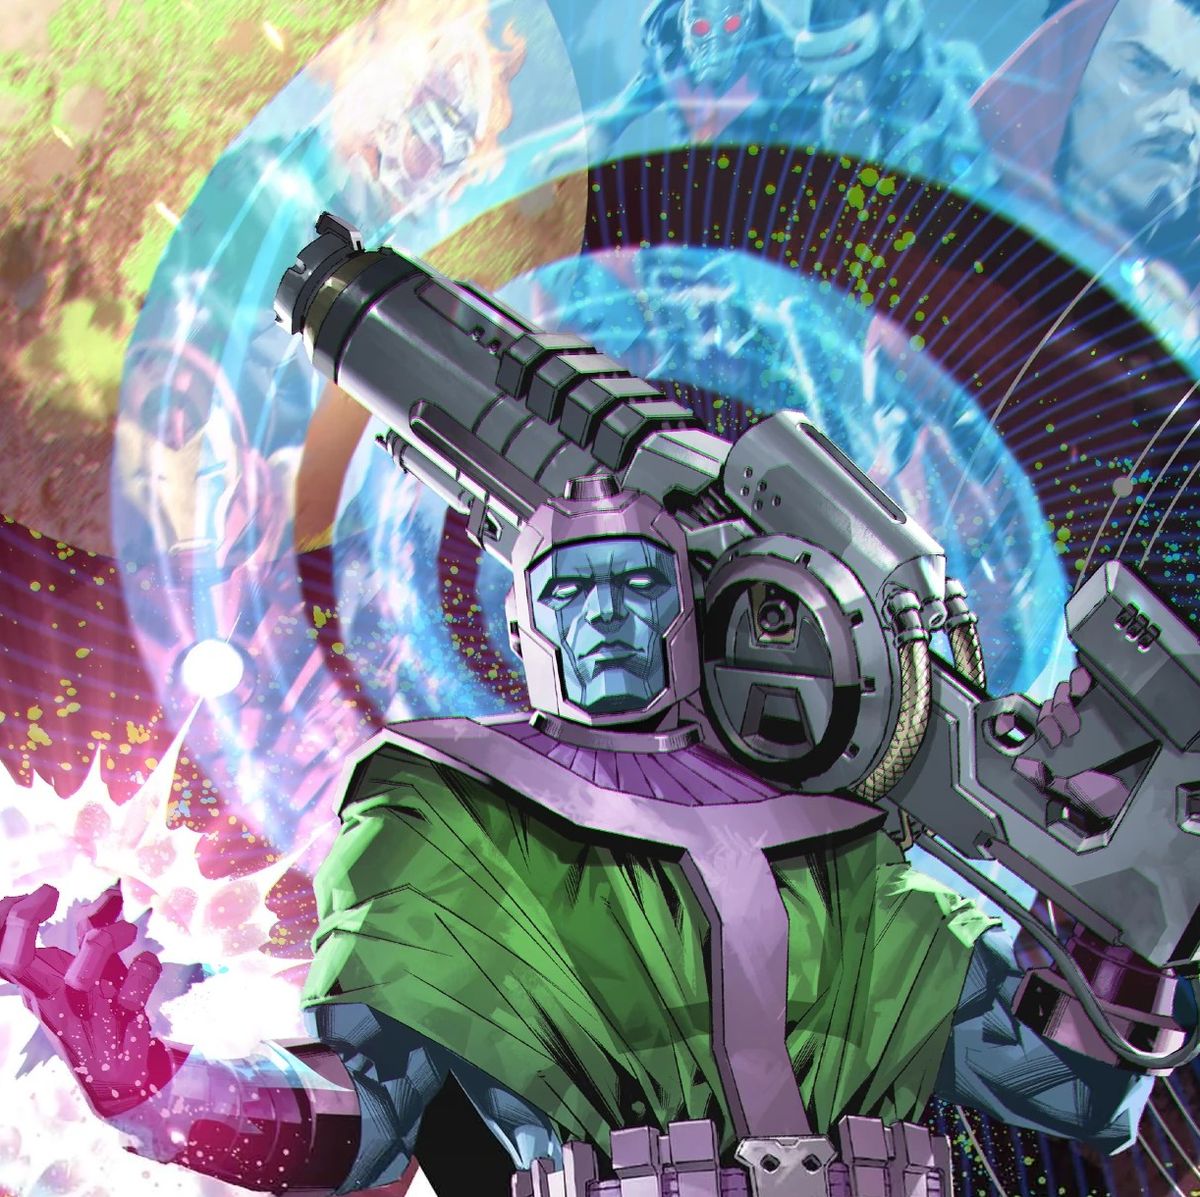 Here's What to Know About Kang the Conqueror After 'Ant-Man 3